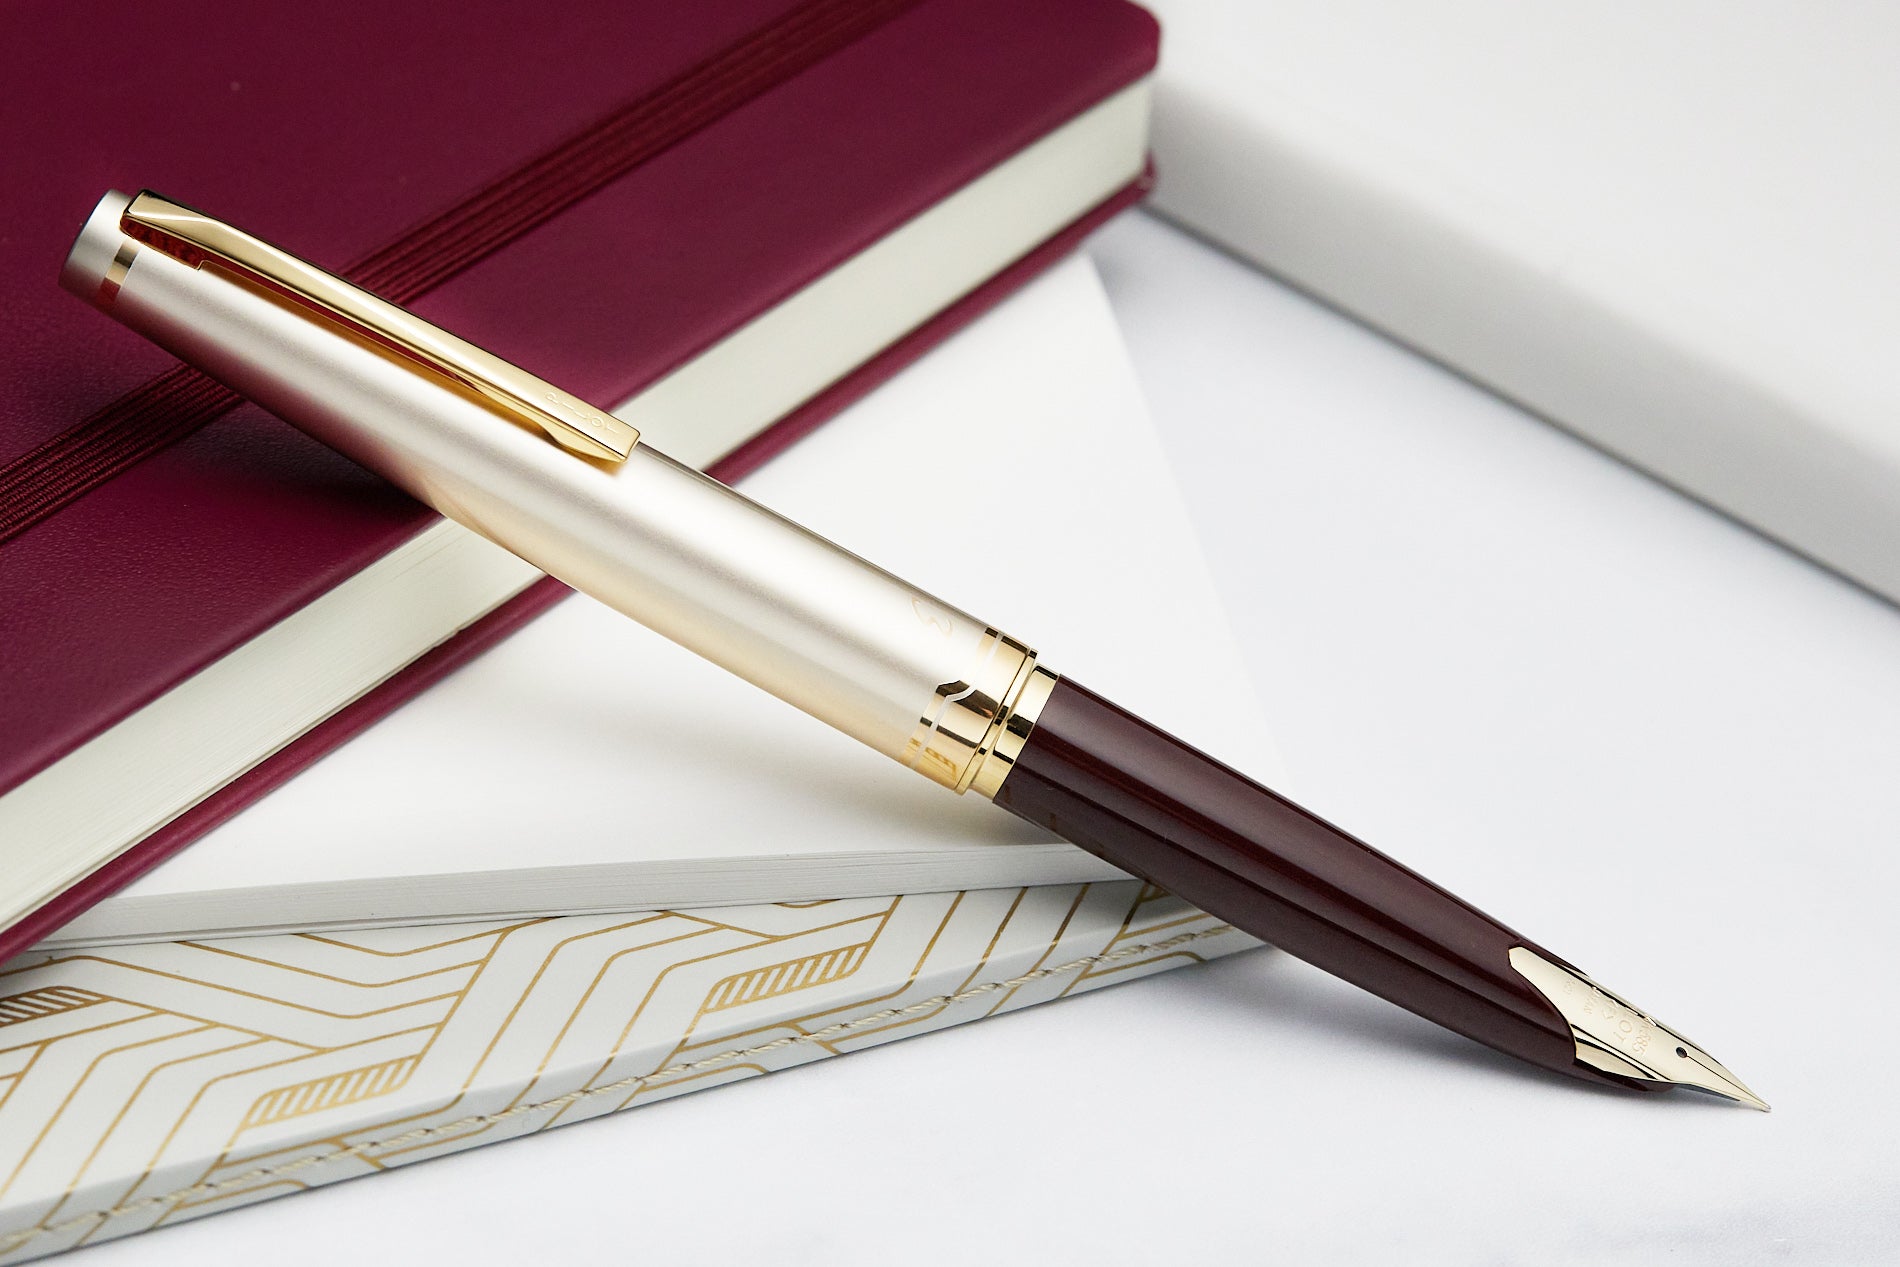 Pilot E95s fountain pen in burgundy/ivory, posted